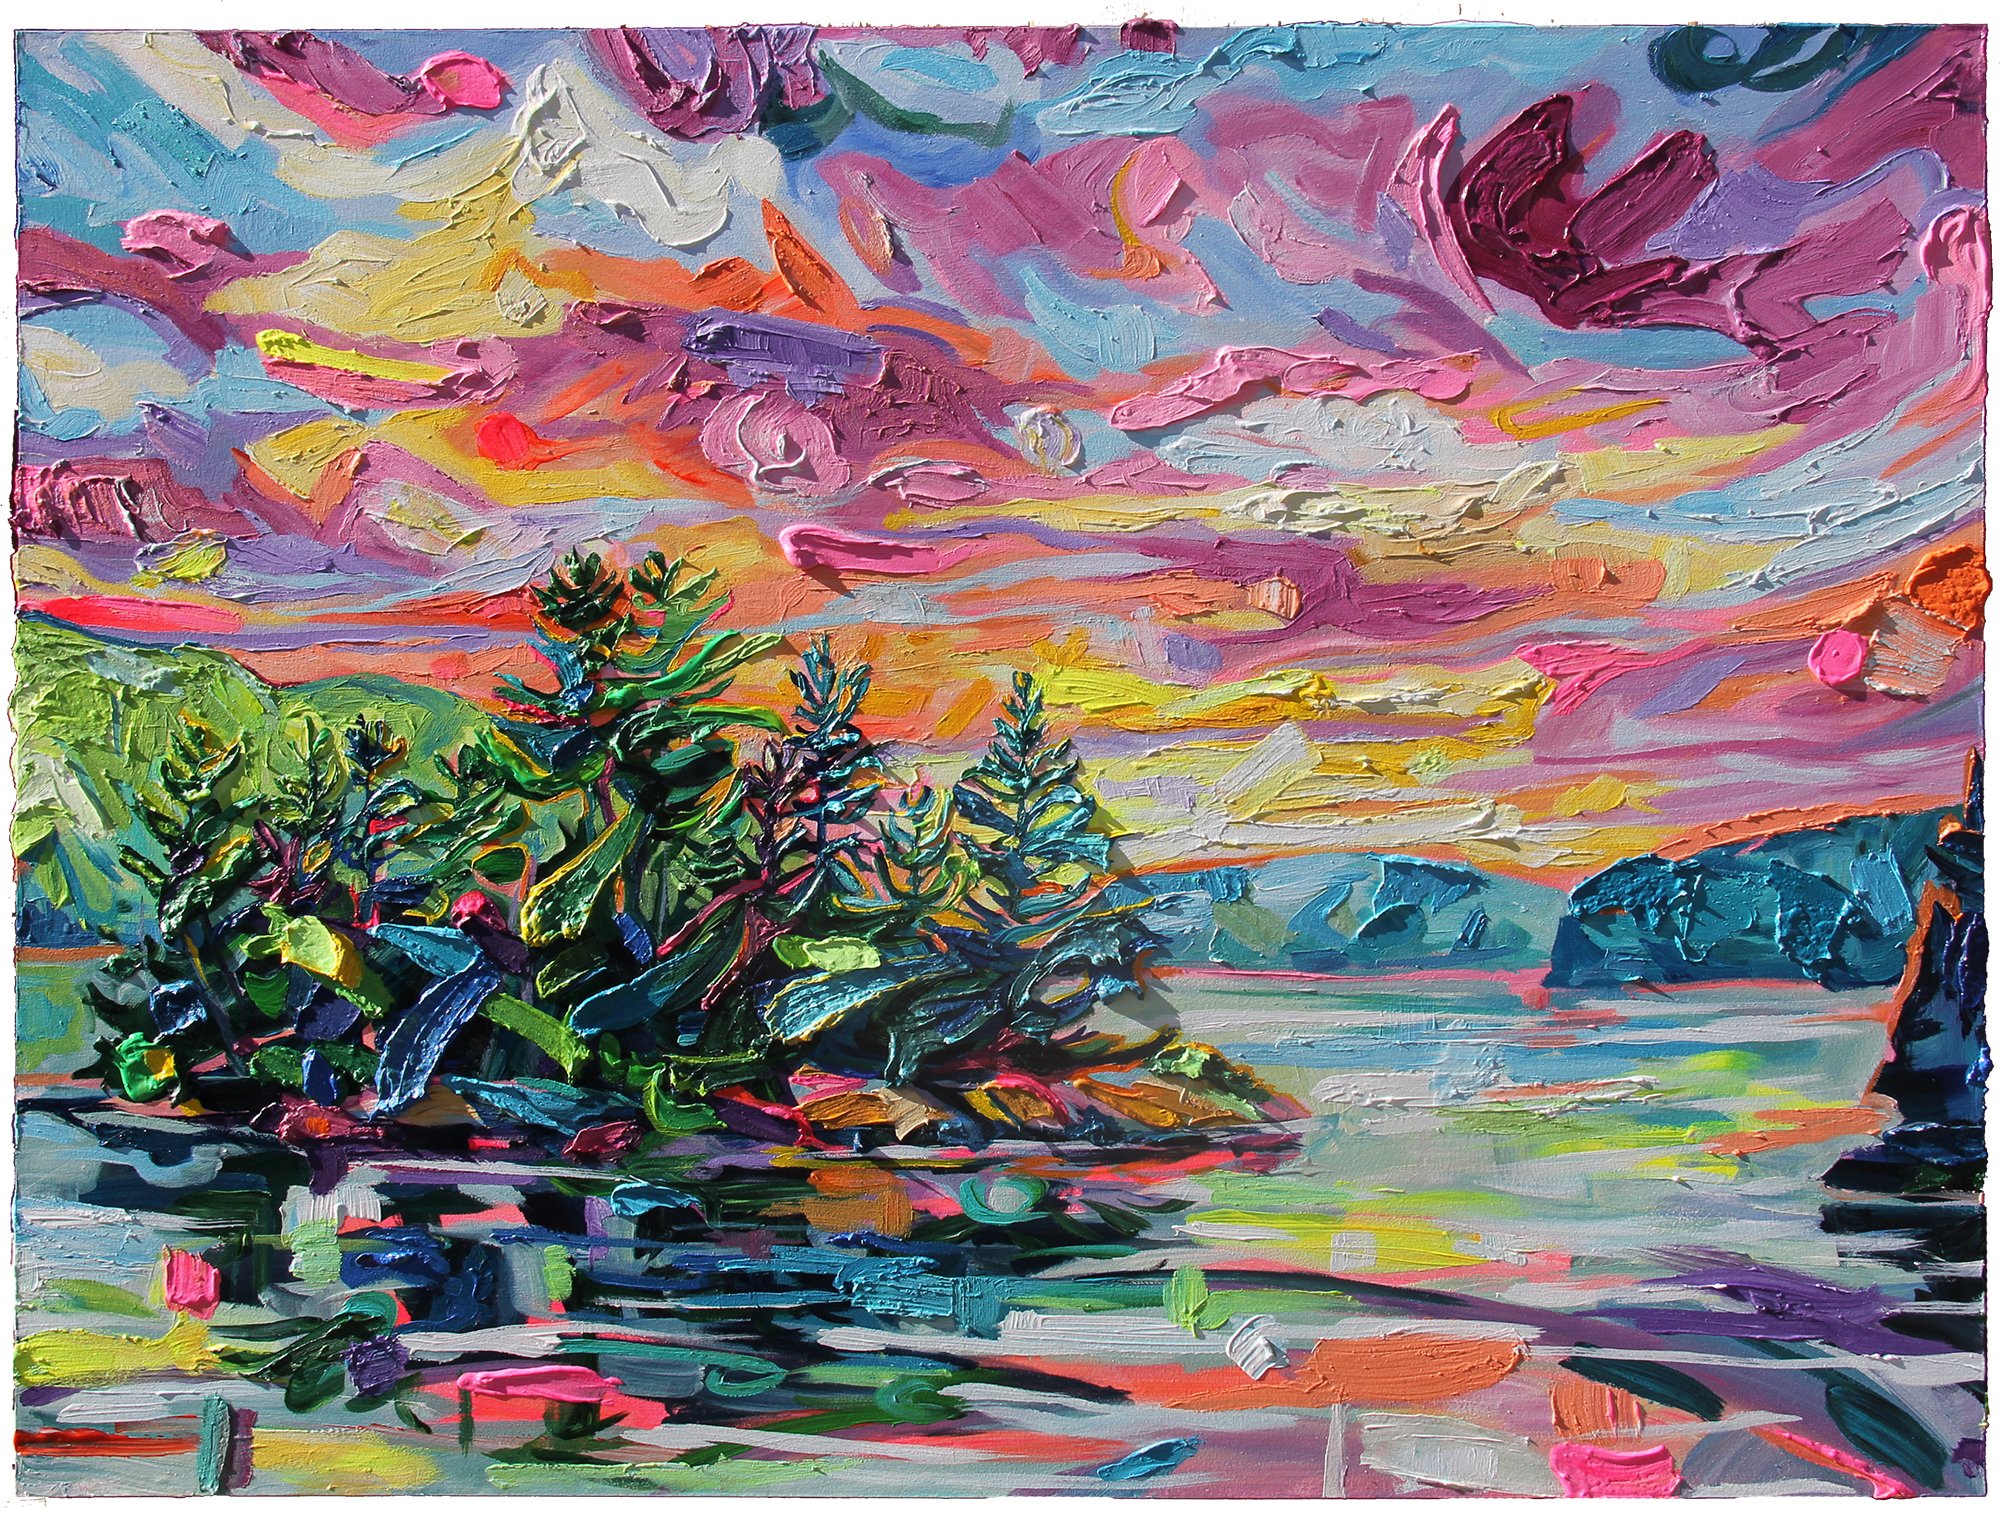 Shimmering Spectacle Lake, 30 x 40", acrylic on panel, 2021